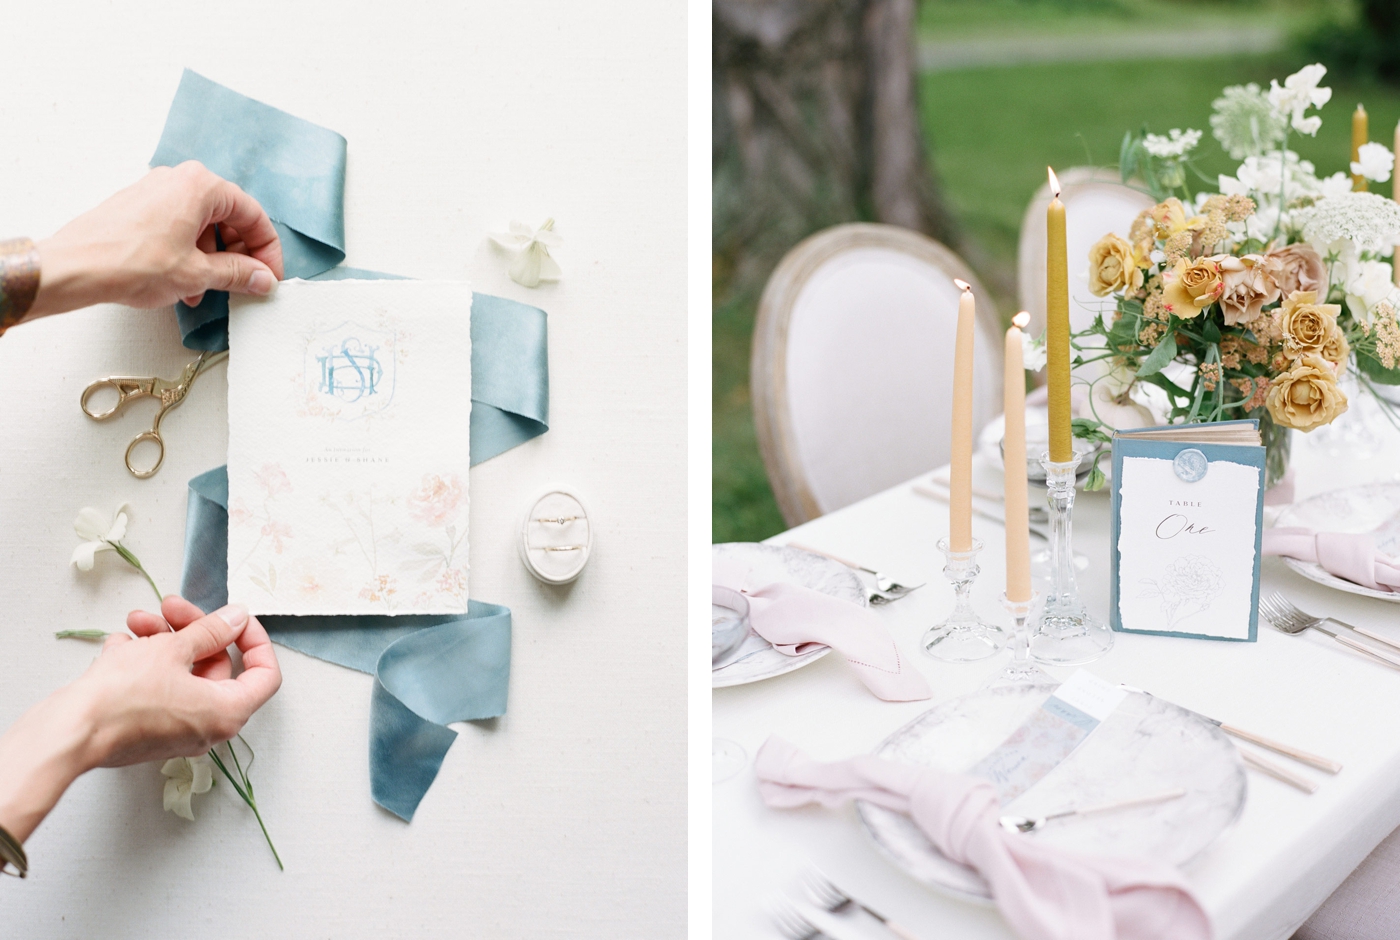 Styled Shoot Planning Tips for Wedding Vendors | Verve Event Co.